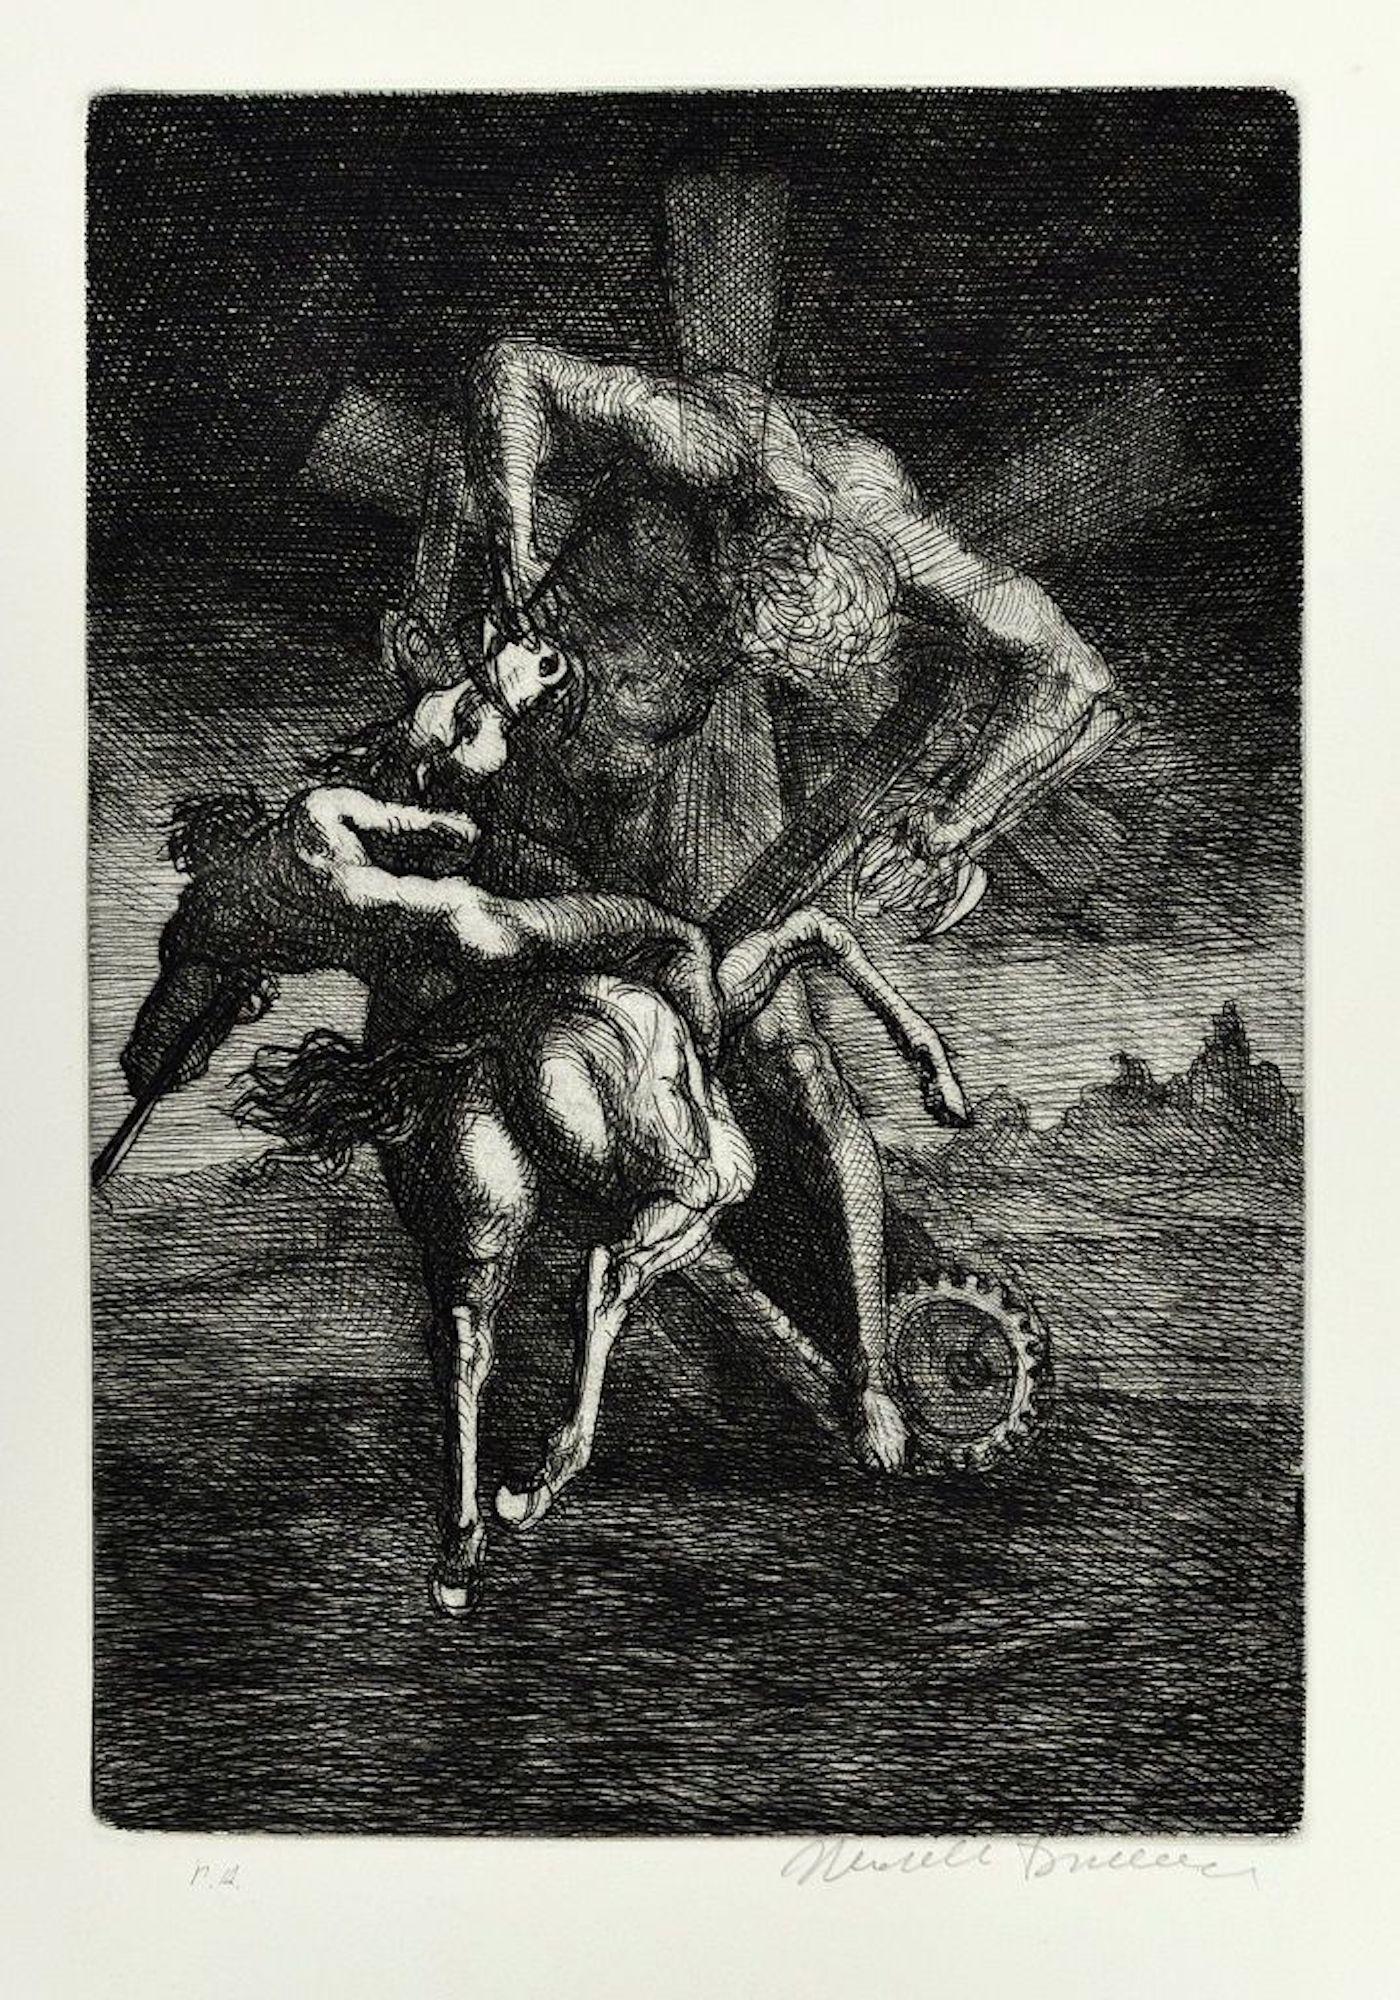 Marcello Tommasi Figurative Print - Untitled - From "Don Chisciotte" - Original Etching by M. Tommasi - 1970